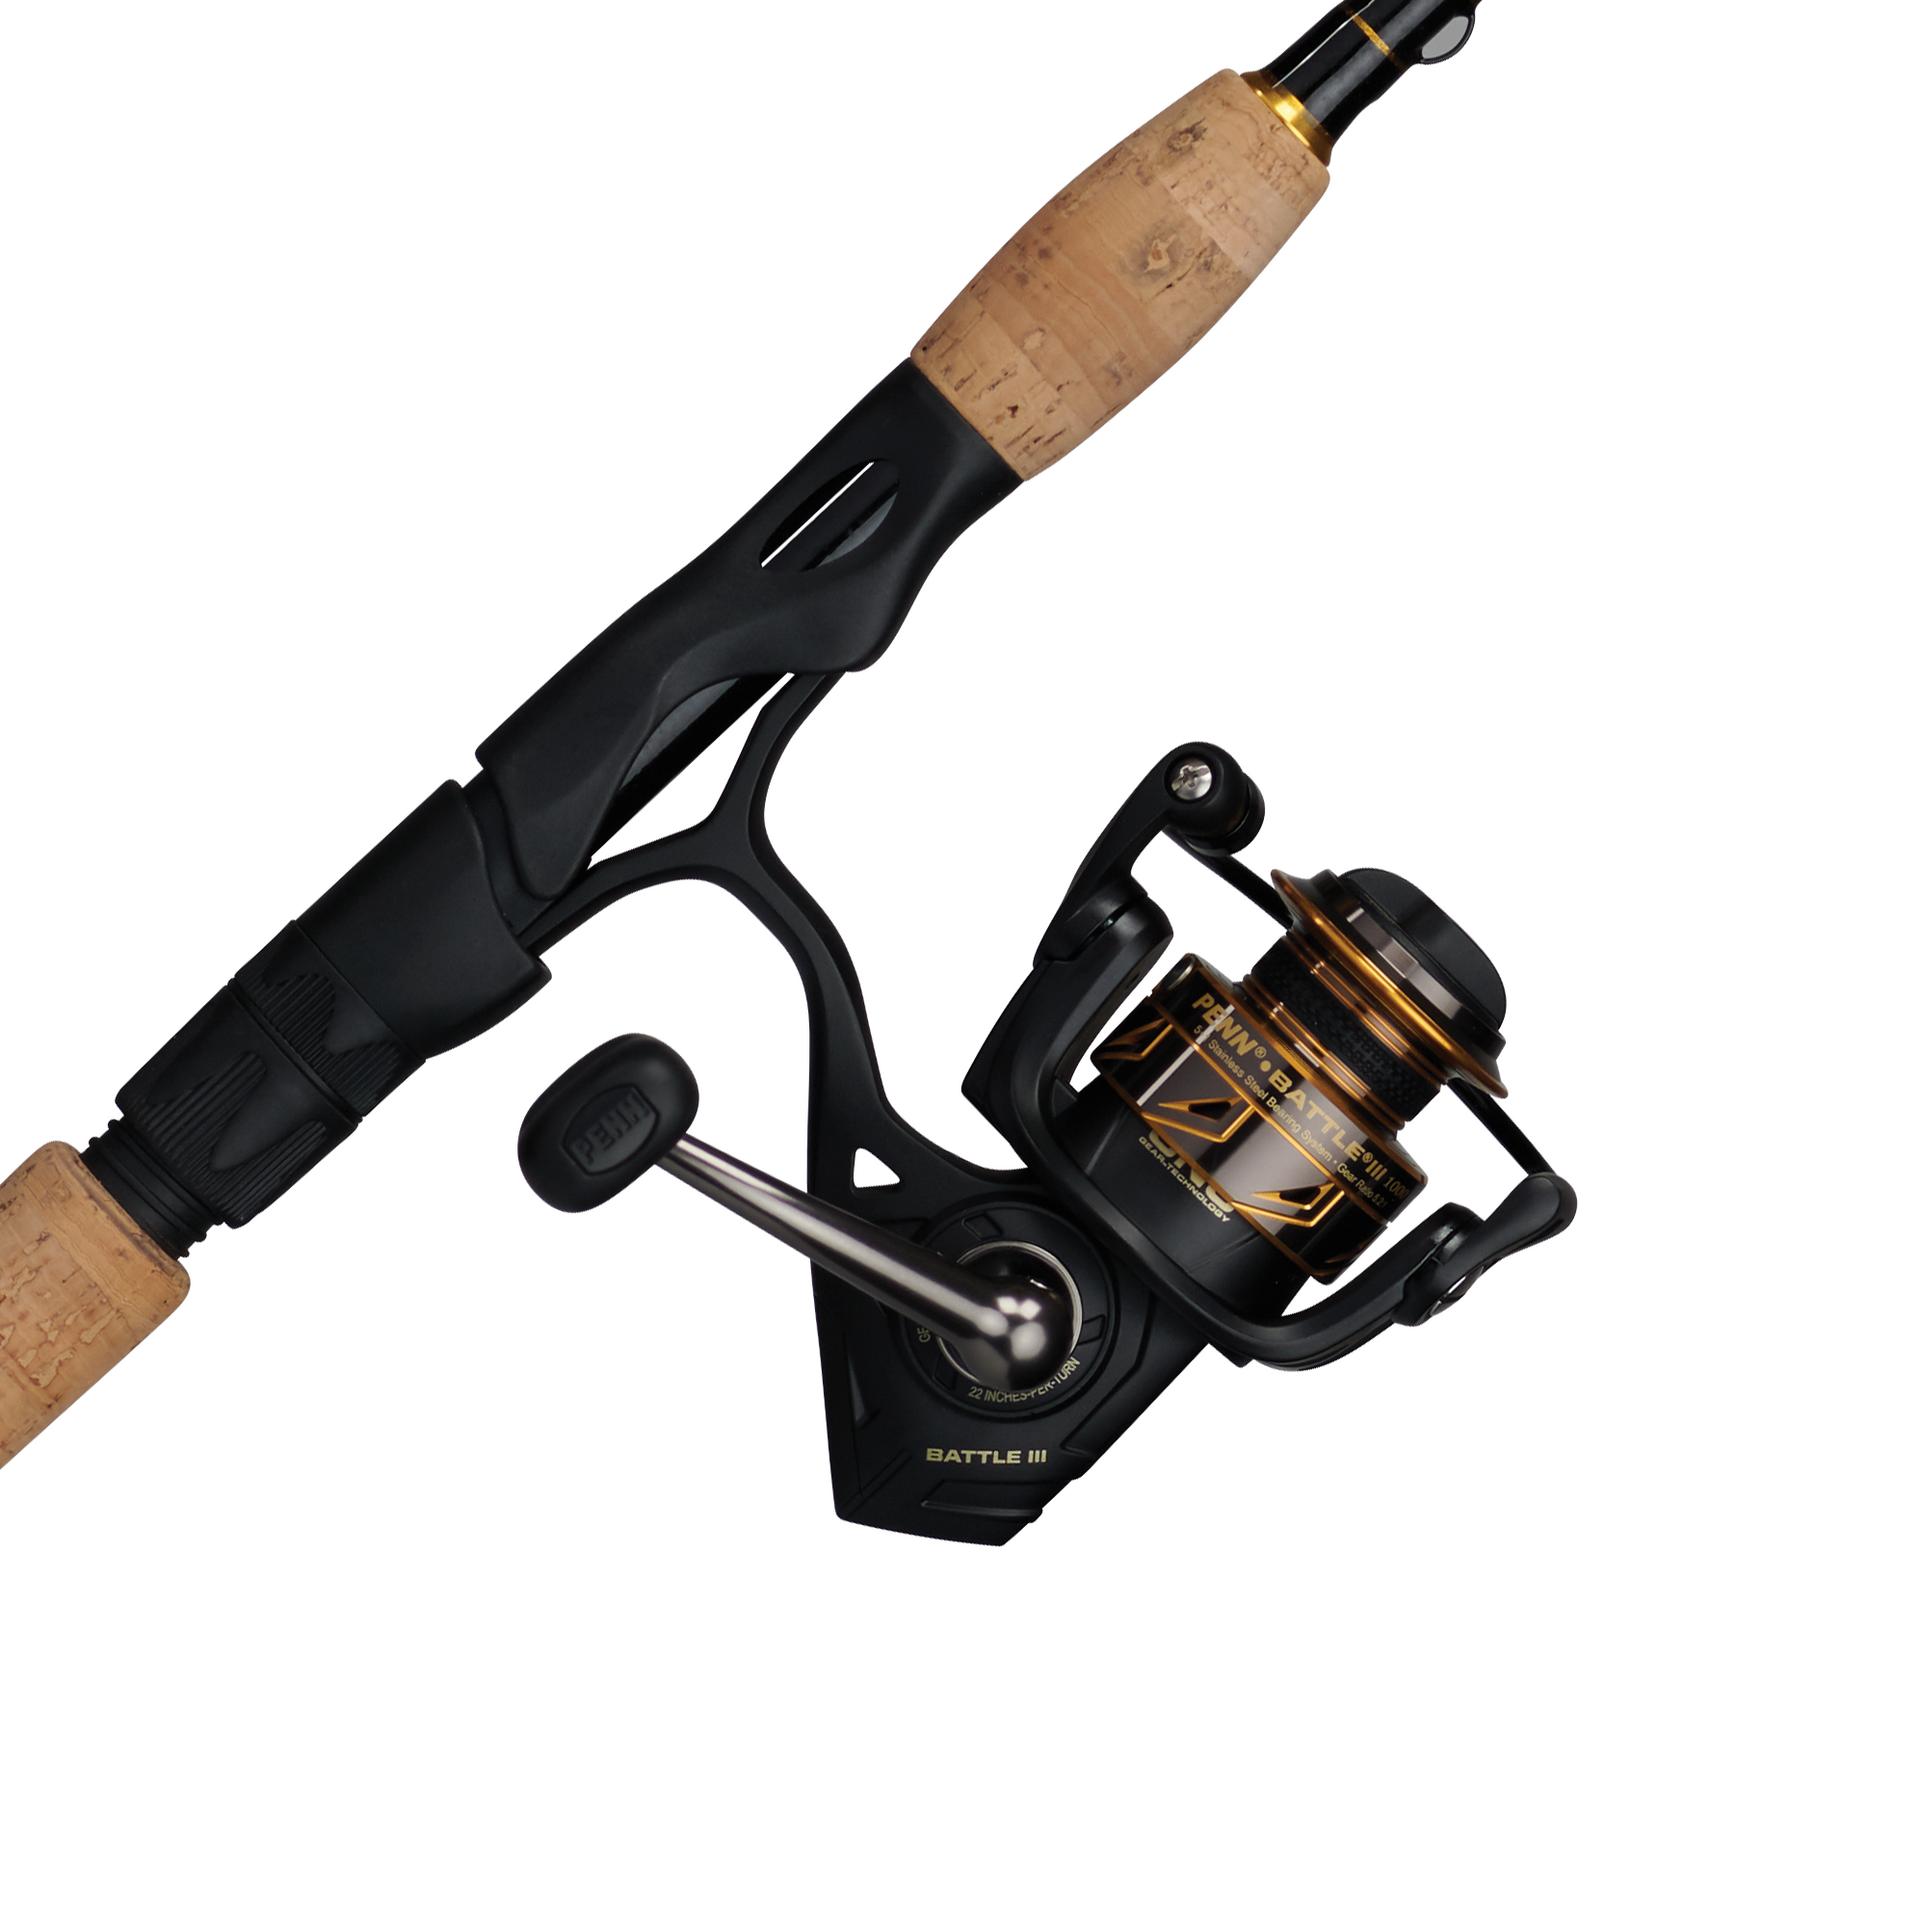 Penn Authority Spinning Fishing Reel, Select Size & Speed